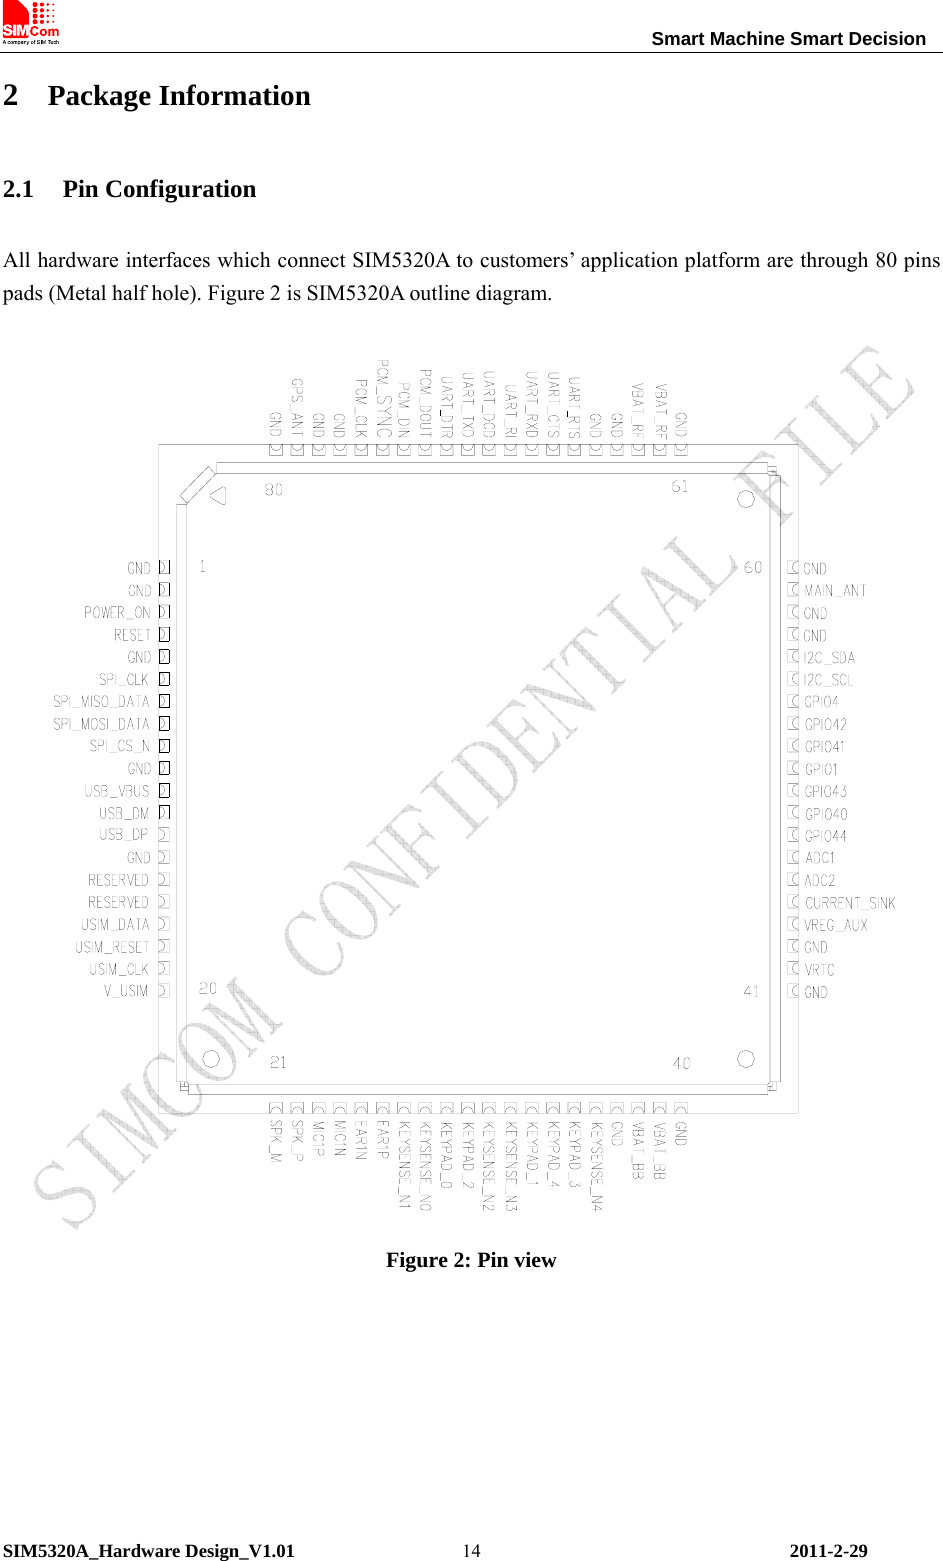                                                                Smart Machine Smart Decision SIM5320A_Hardware Design_V1.01   2011-2-29 142 Package Information 2.1 Pin Configuration All hardware interfaces which connect SIM5320A to customers’ application platform are through 80 pins pads (Metal half hole). Figure 2 is SIM5320A outline diagram.   Figure 2: Pin view   